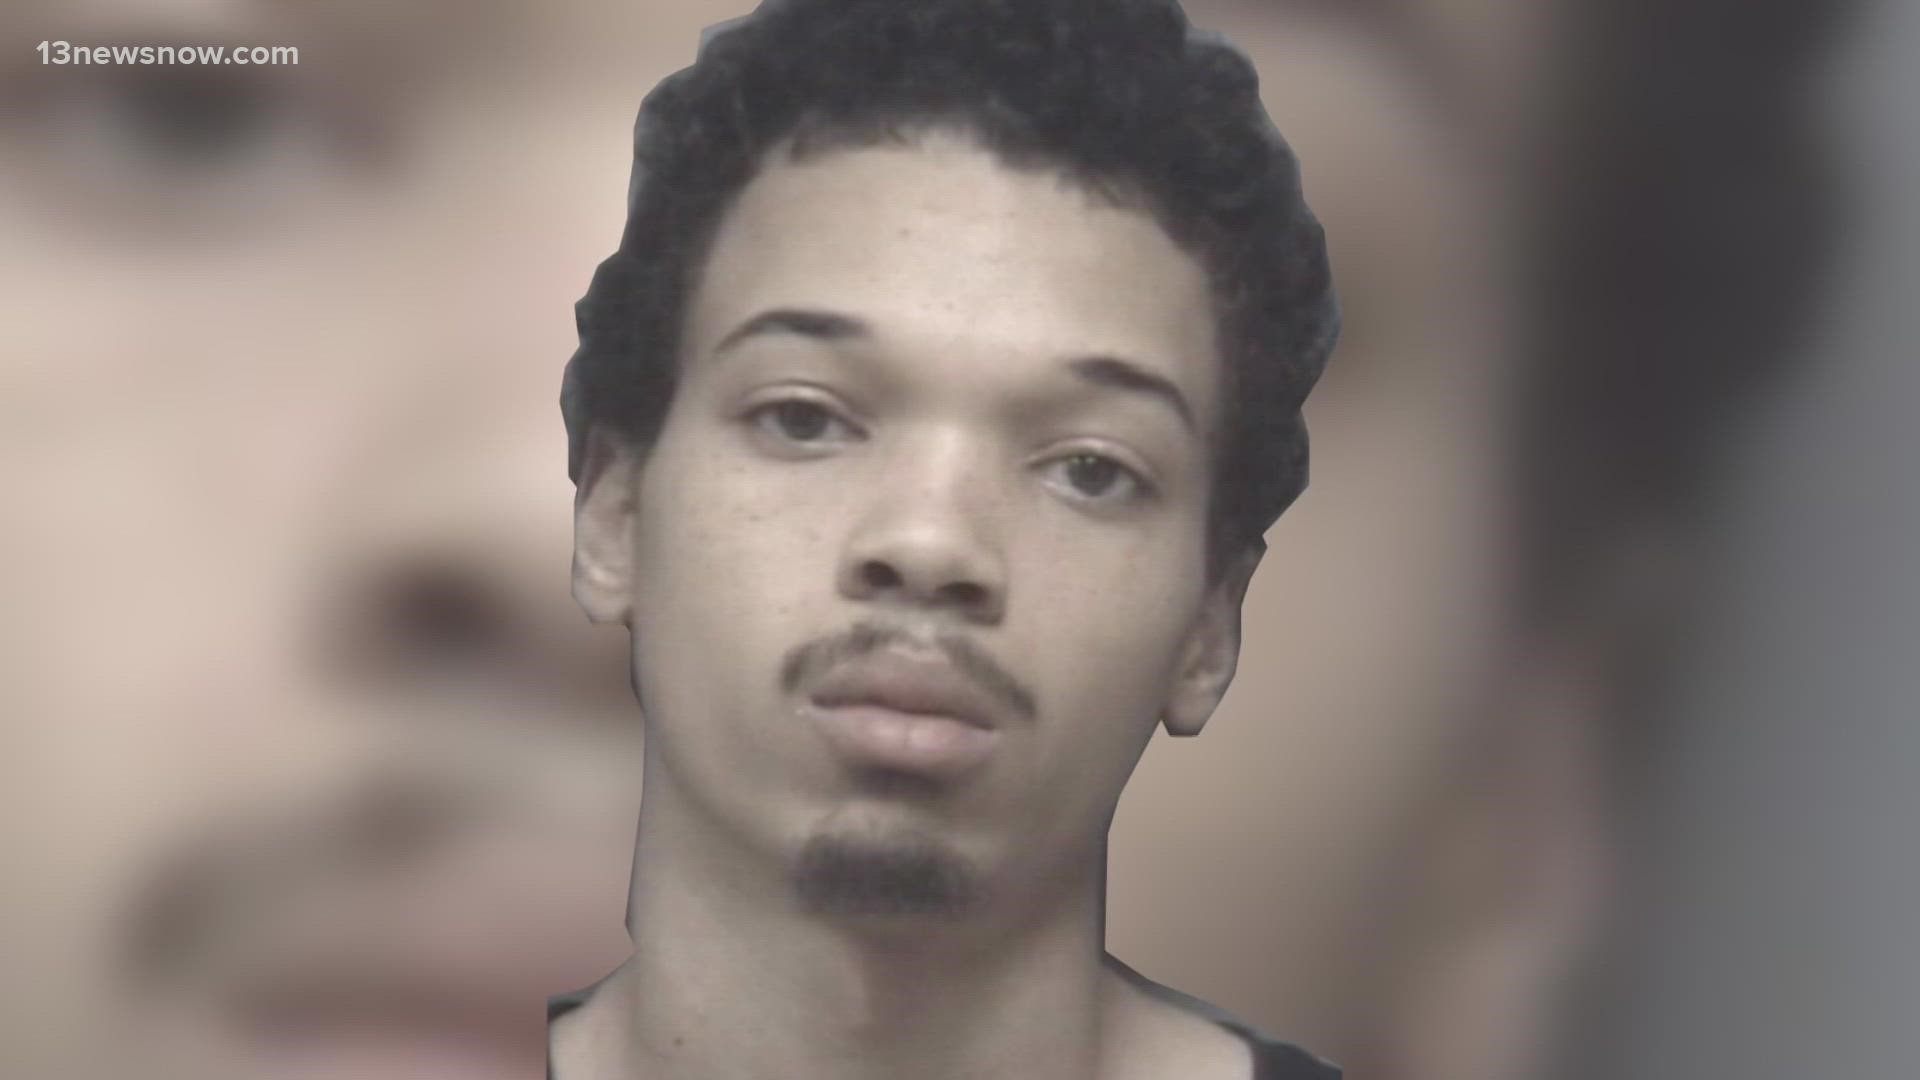 The Isle of Wight Sheriff's Department is searching for a 23-year-old man who they believe shot and killed a 26-year-old on Thursday.